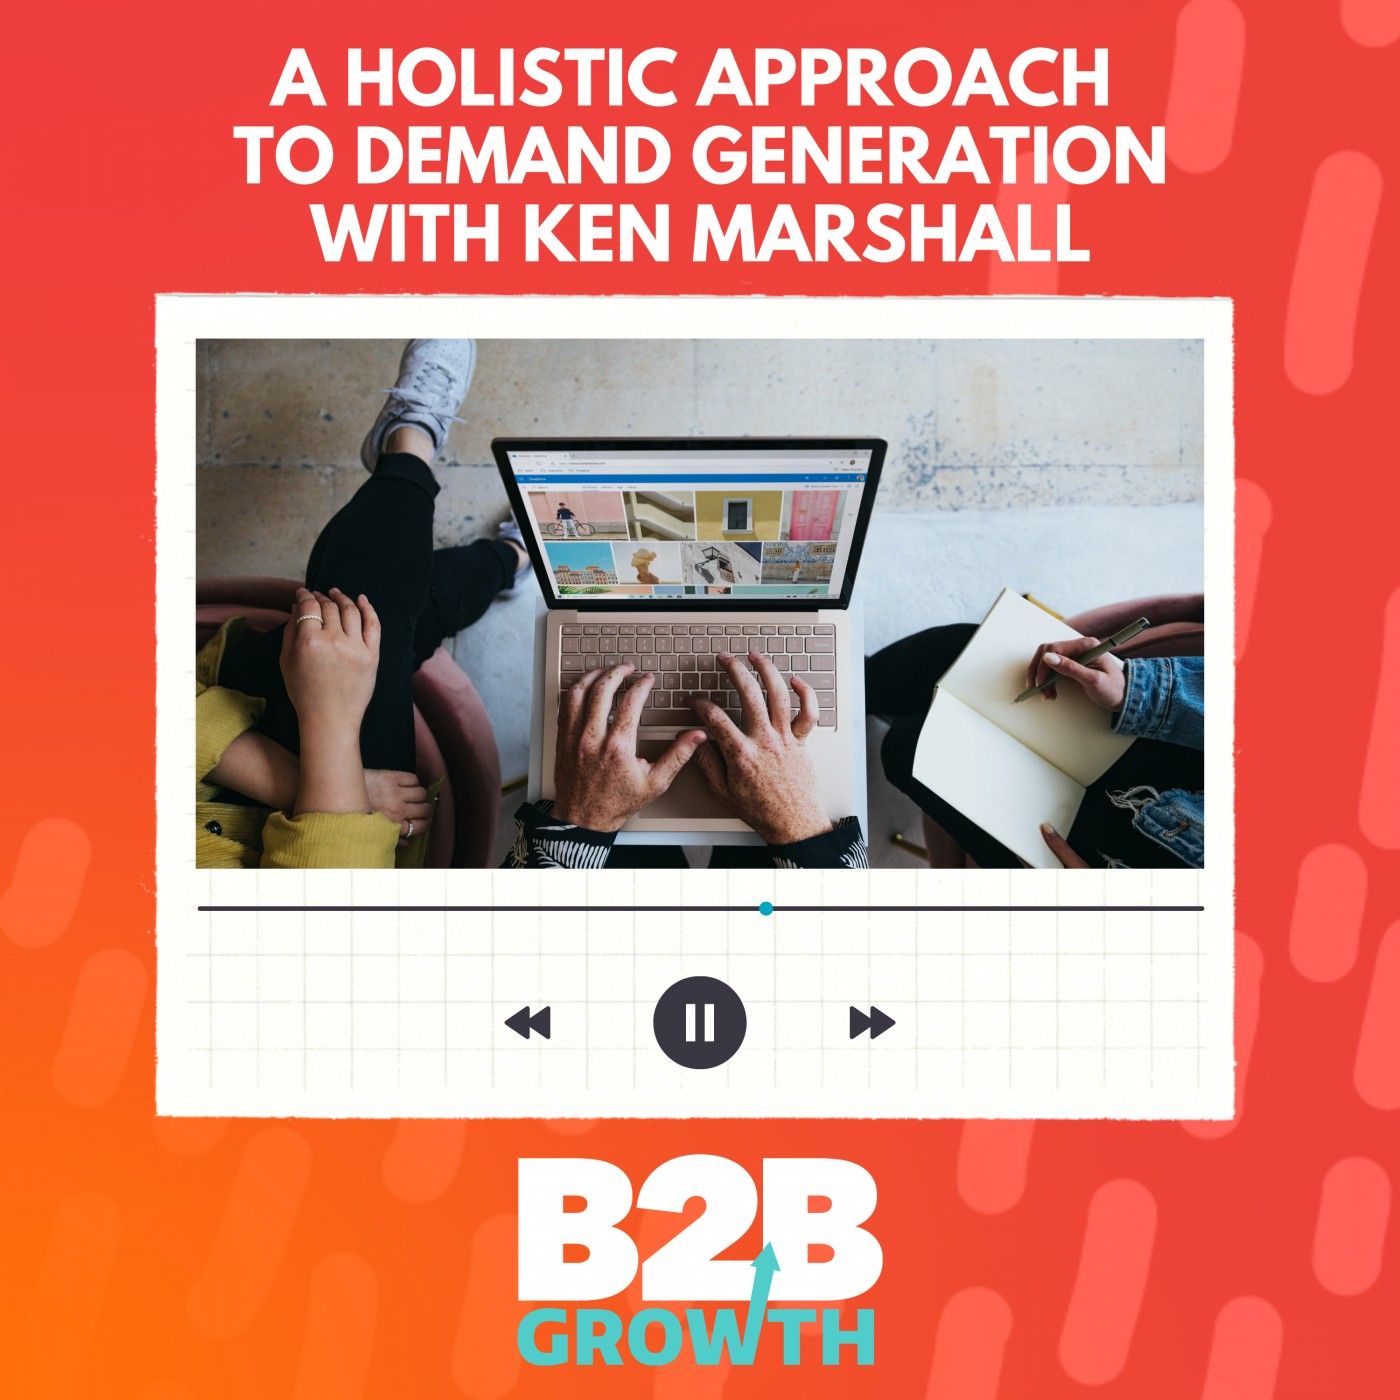 A Holistic Approach to Demand Generation, with Ken Marshall